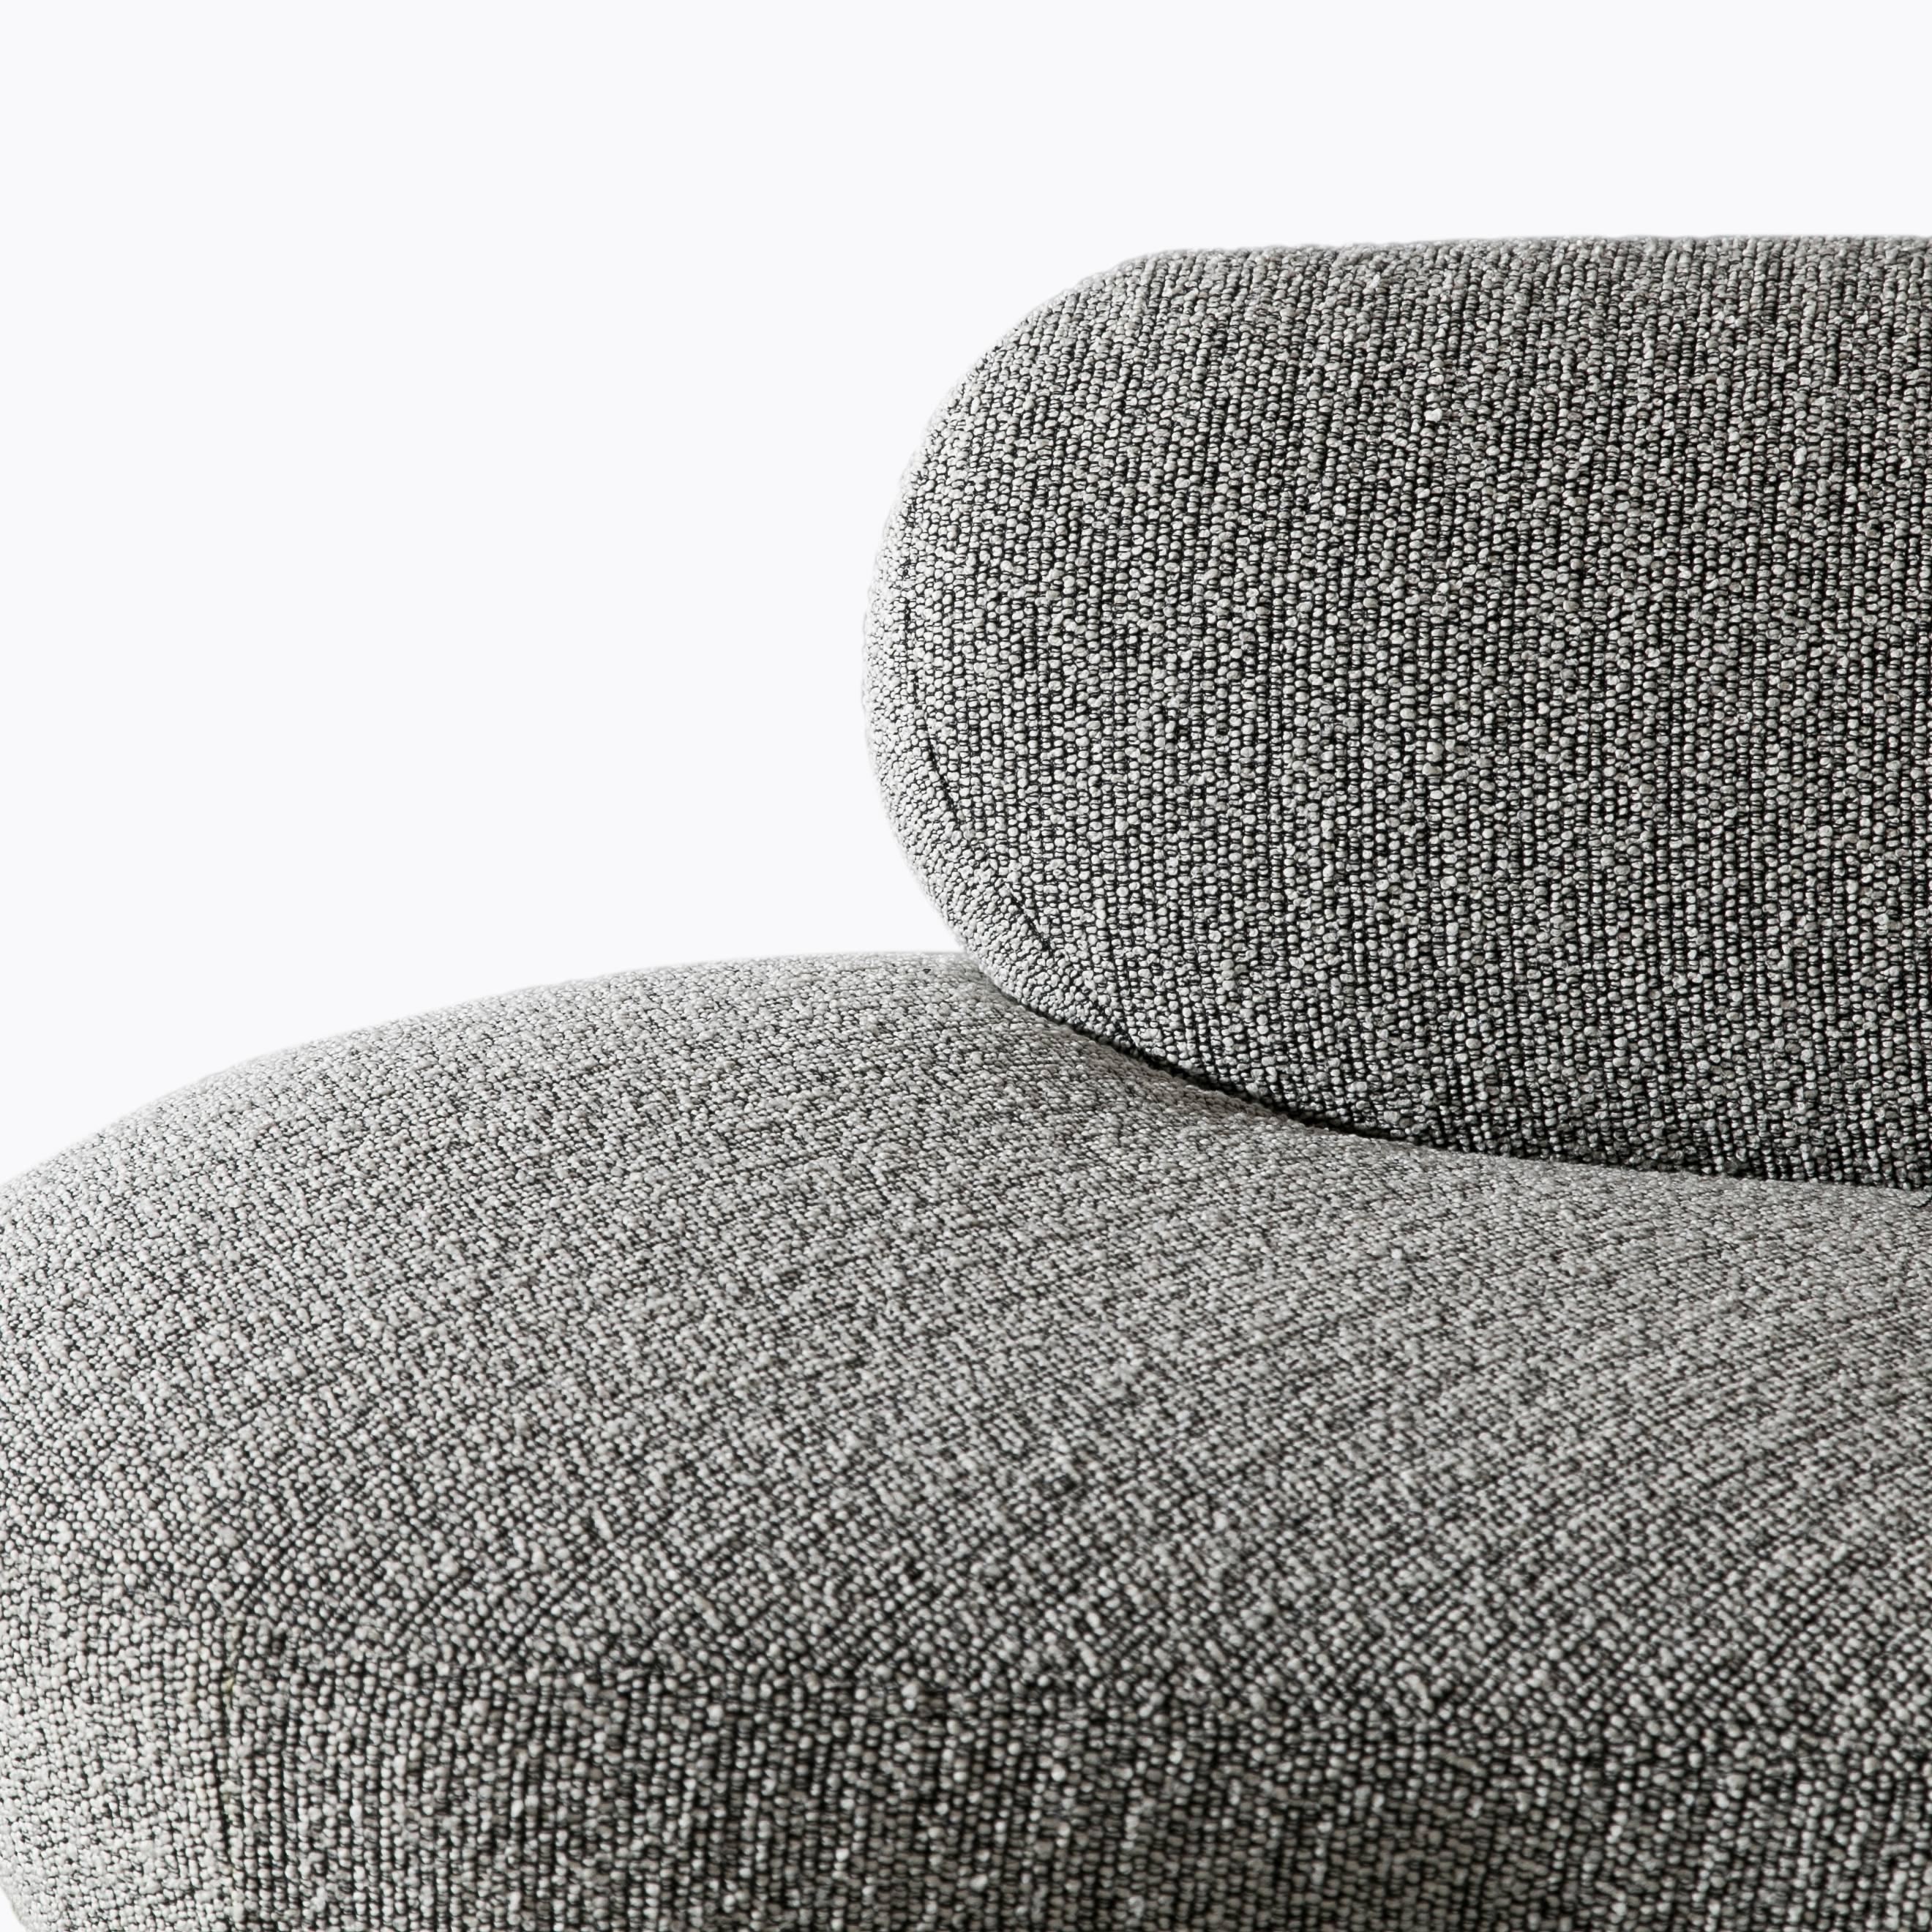 Iconic biomorphic sofa upholstered in black and white wool bouclé with Lucite centre support.